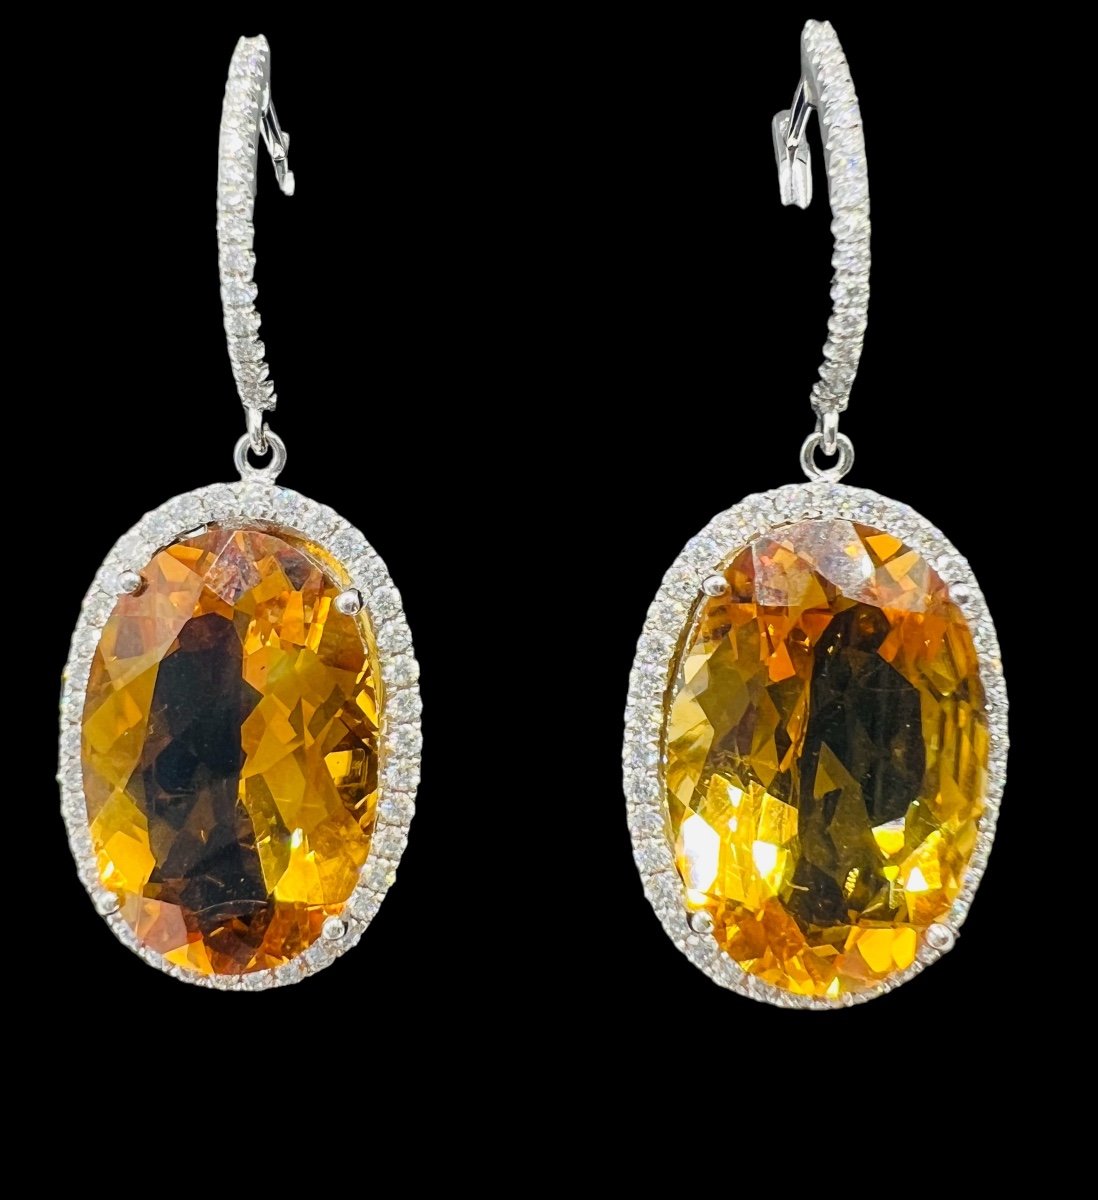 Pair Of 18 Carat Gold Earrings Set With Citrines Surrounded By Diamonds